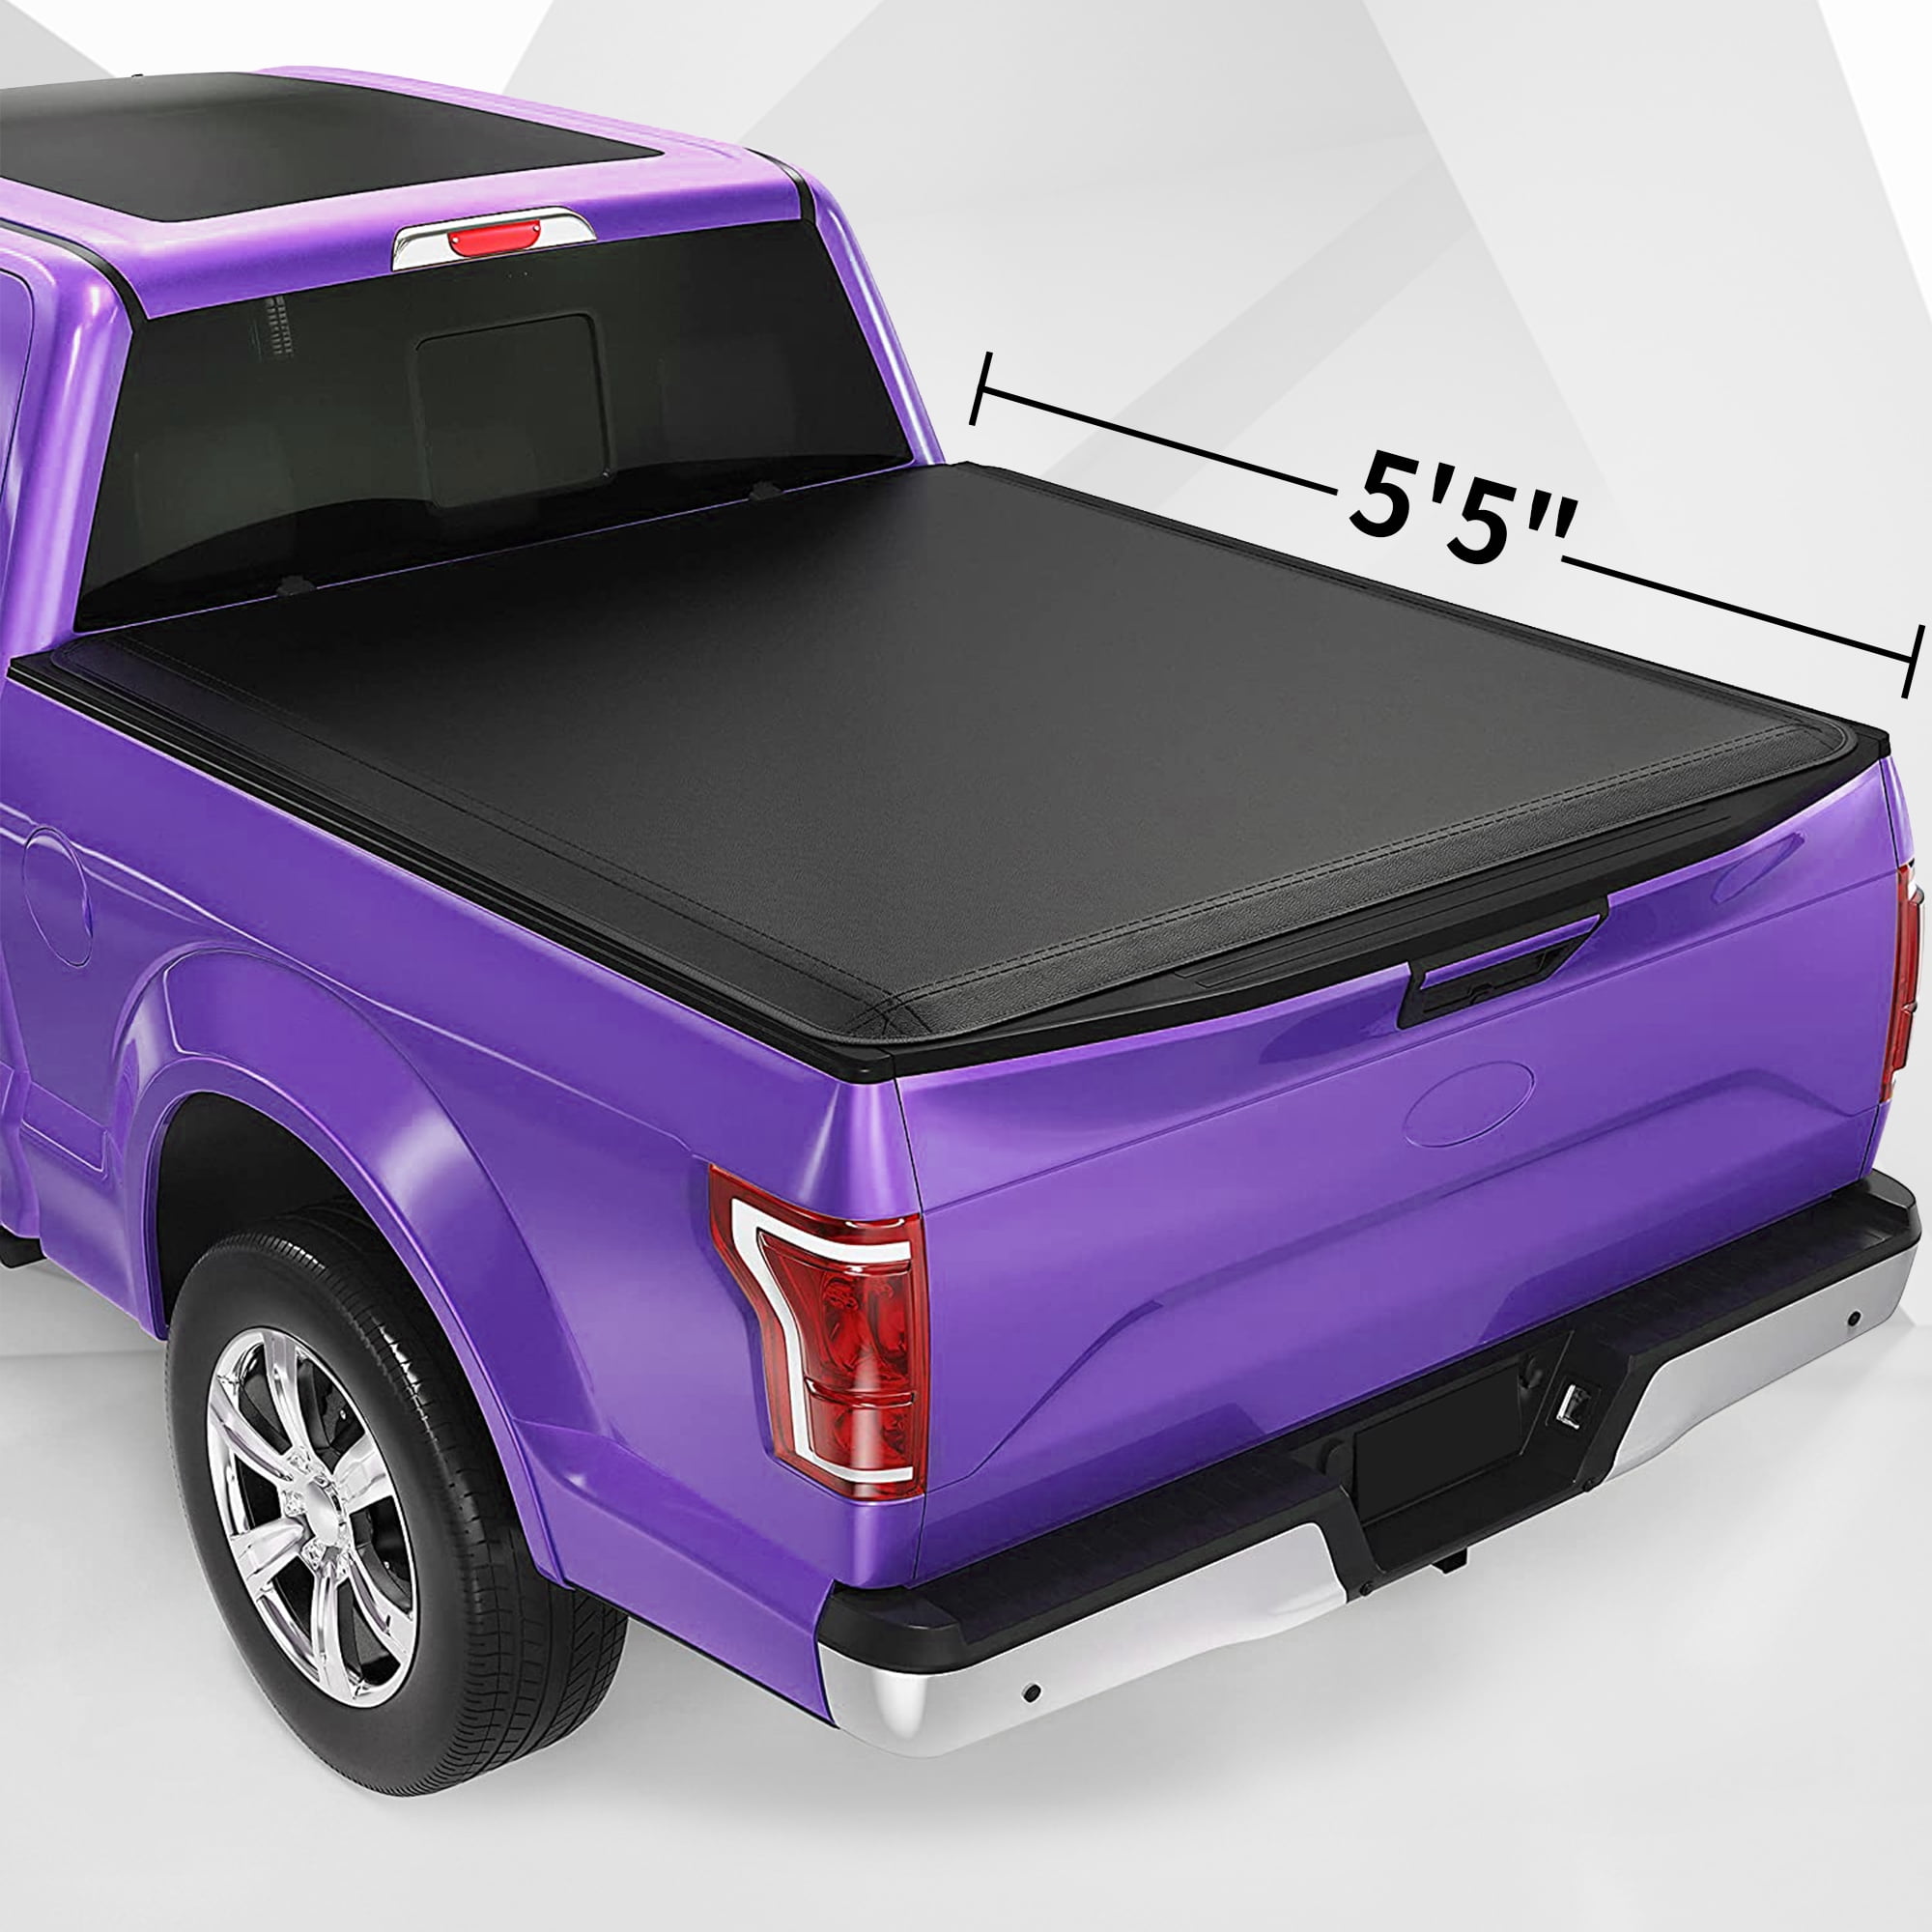 OSIAS Tri-Fold Tonneau Cover with LED light For 2015-2021 Ford F-150 5.5' Bed 